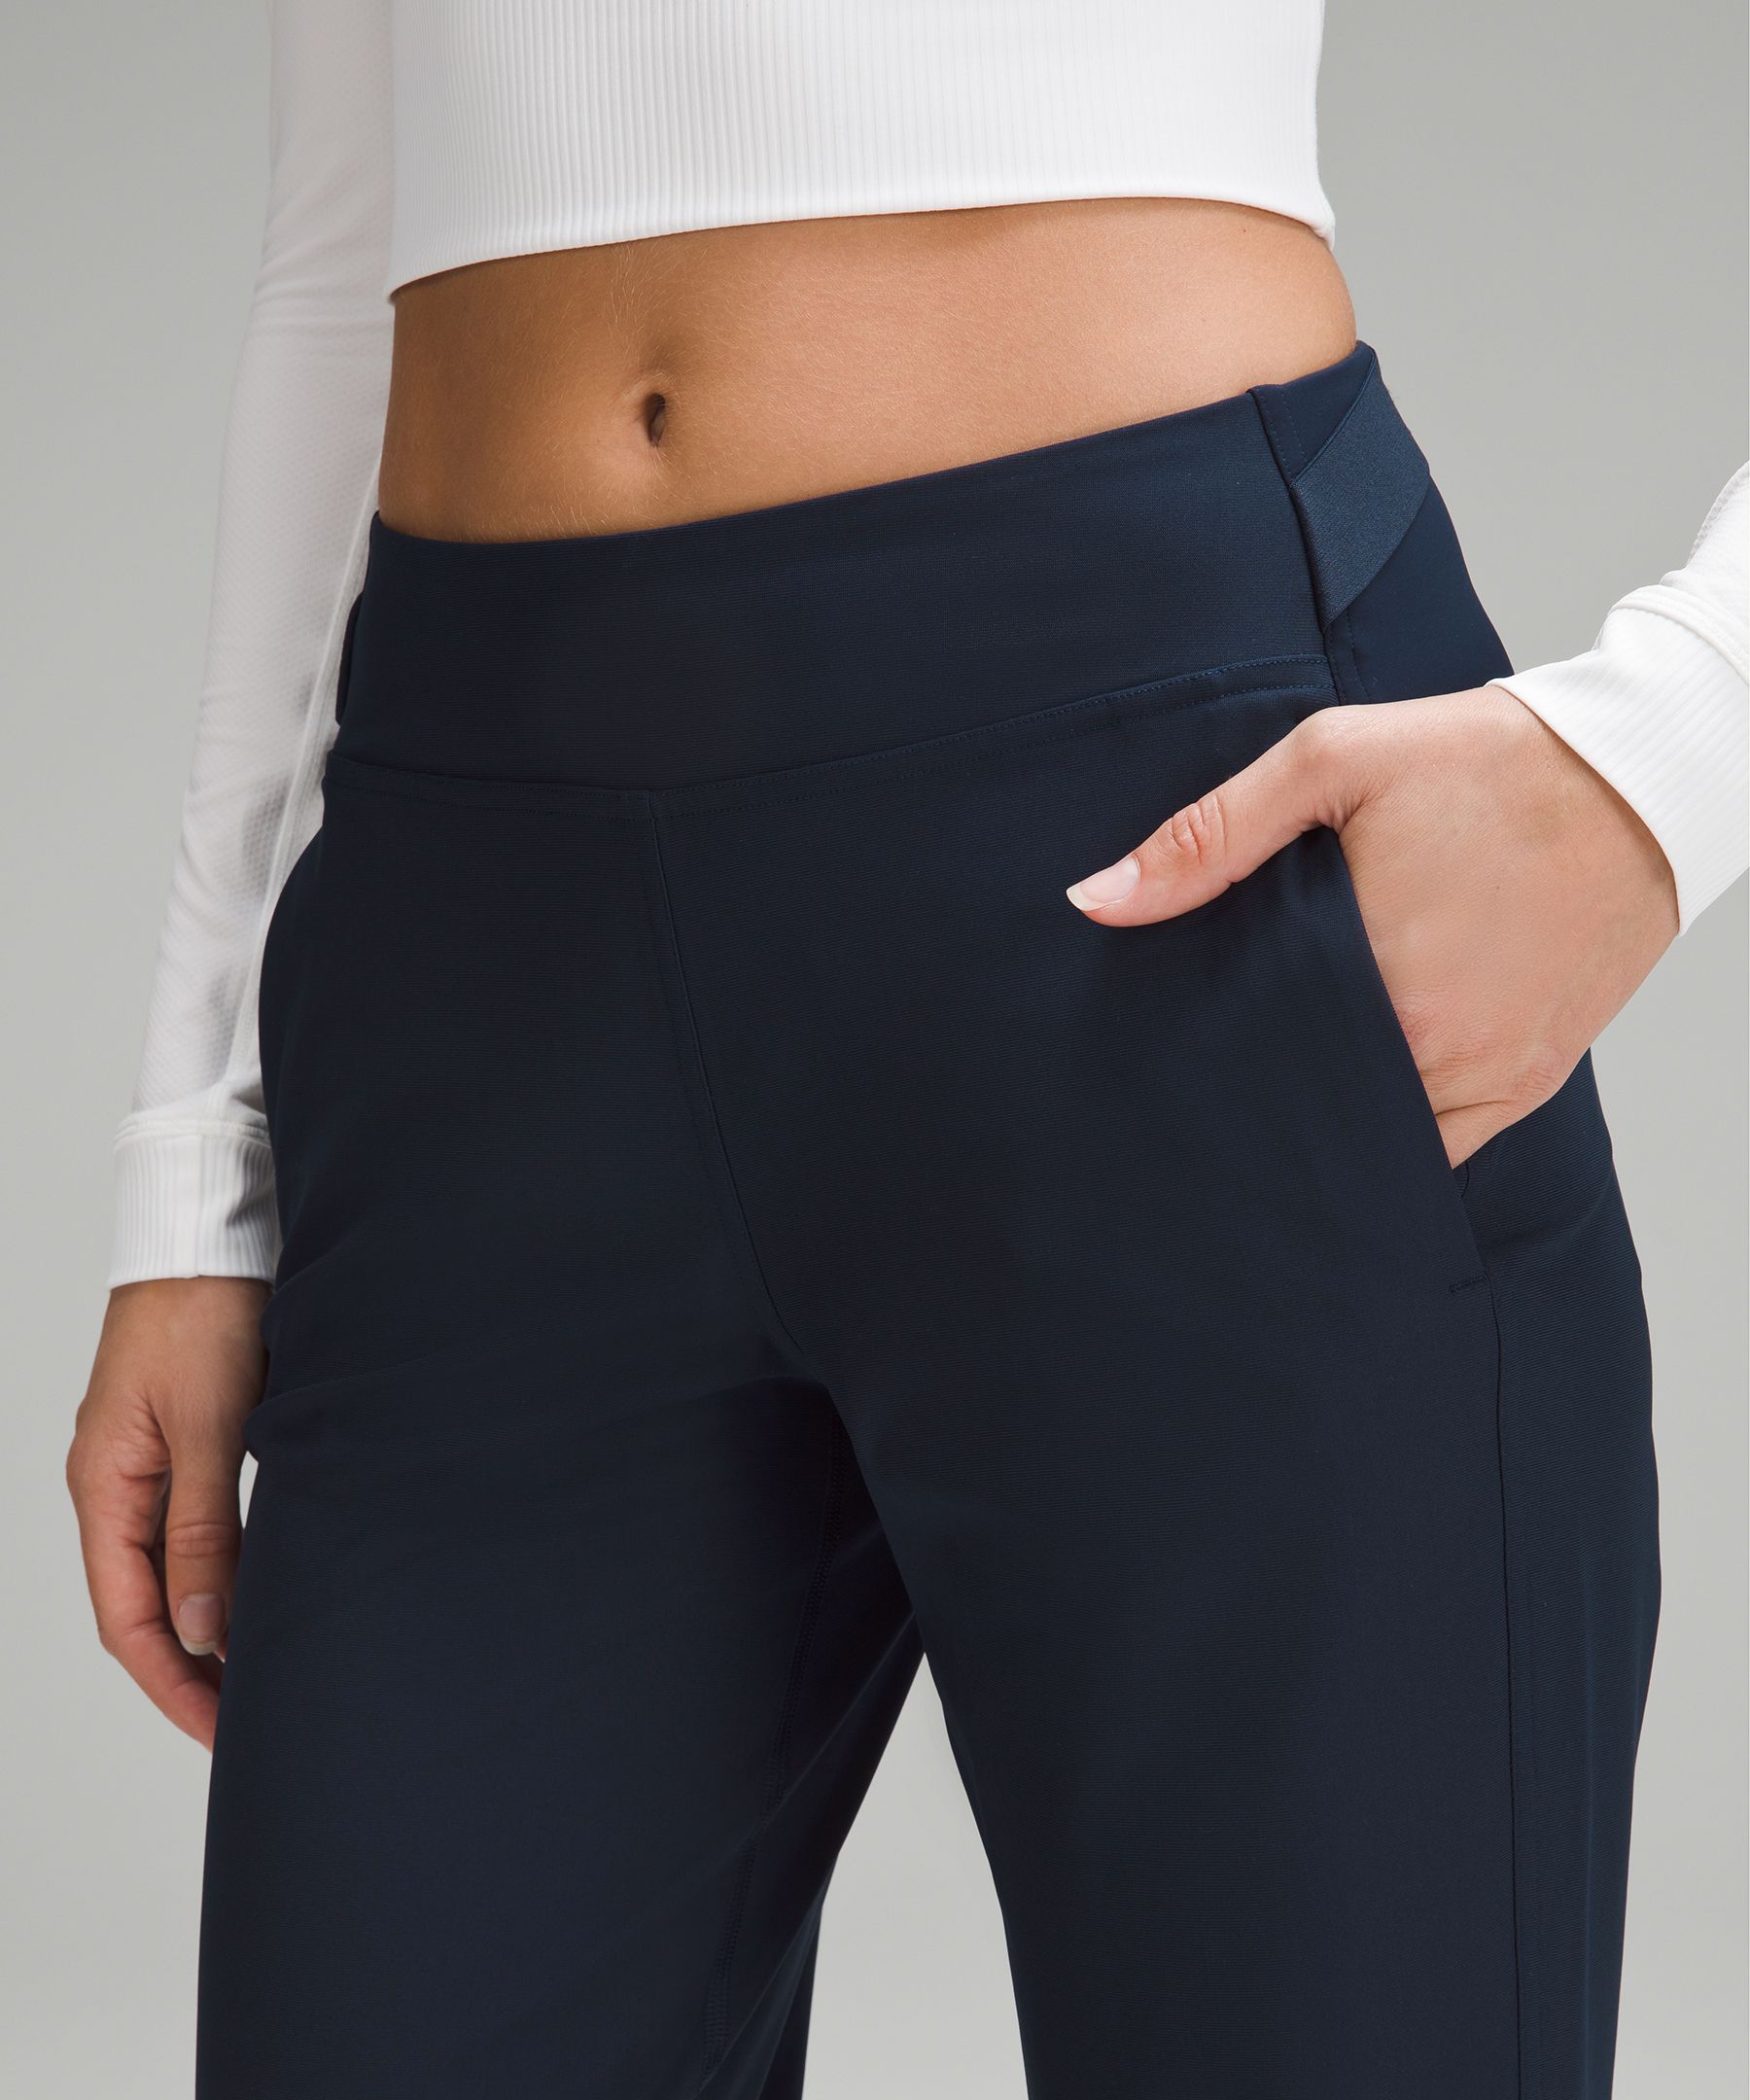 Save $67 On The Lululemon Golf Pants Today In This Mid-Summer Sale